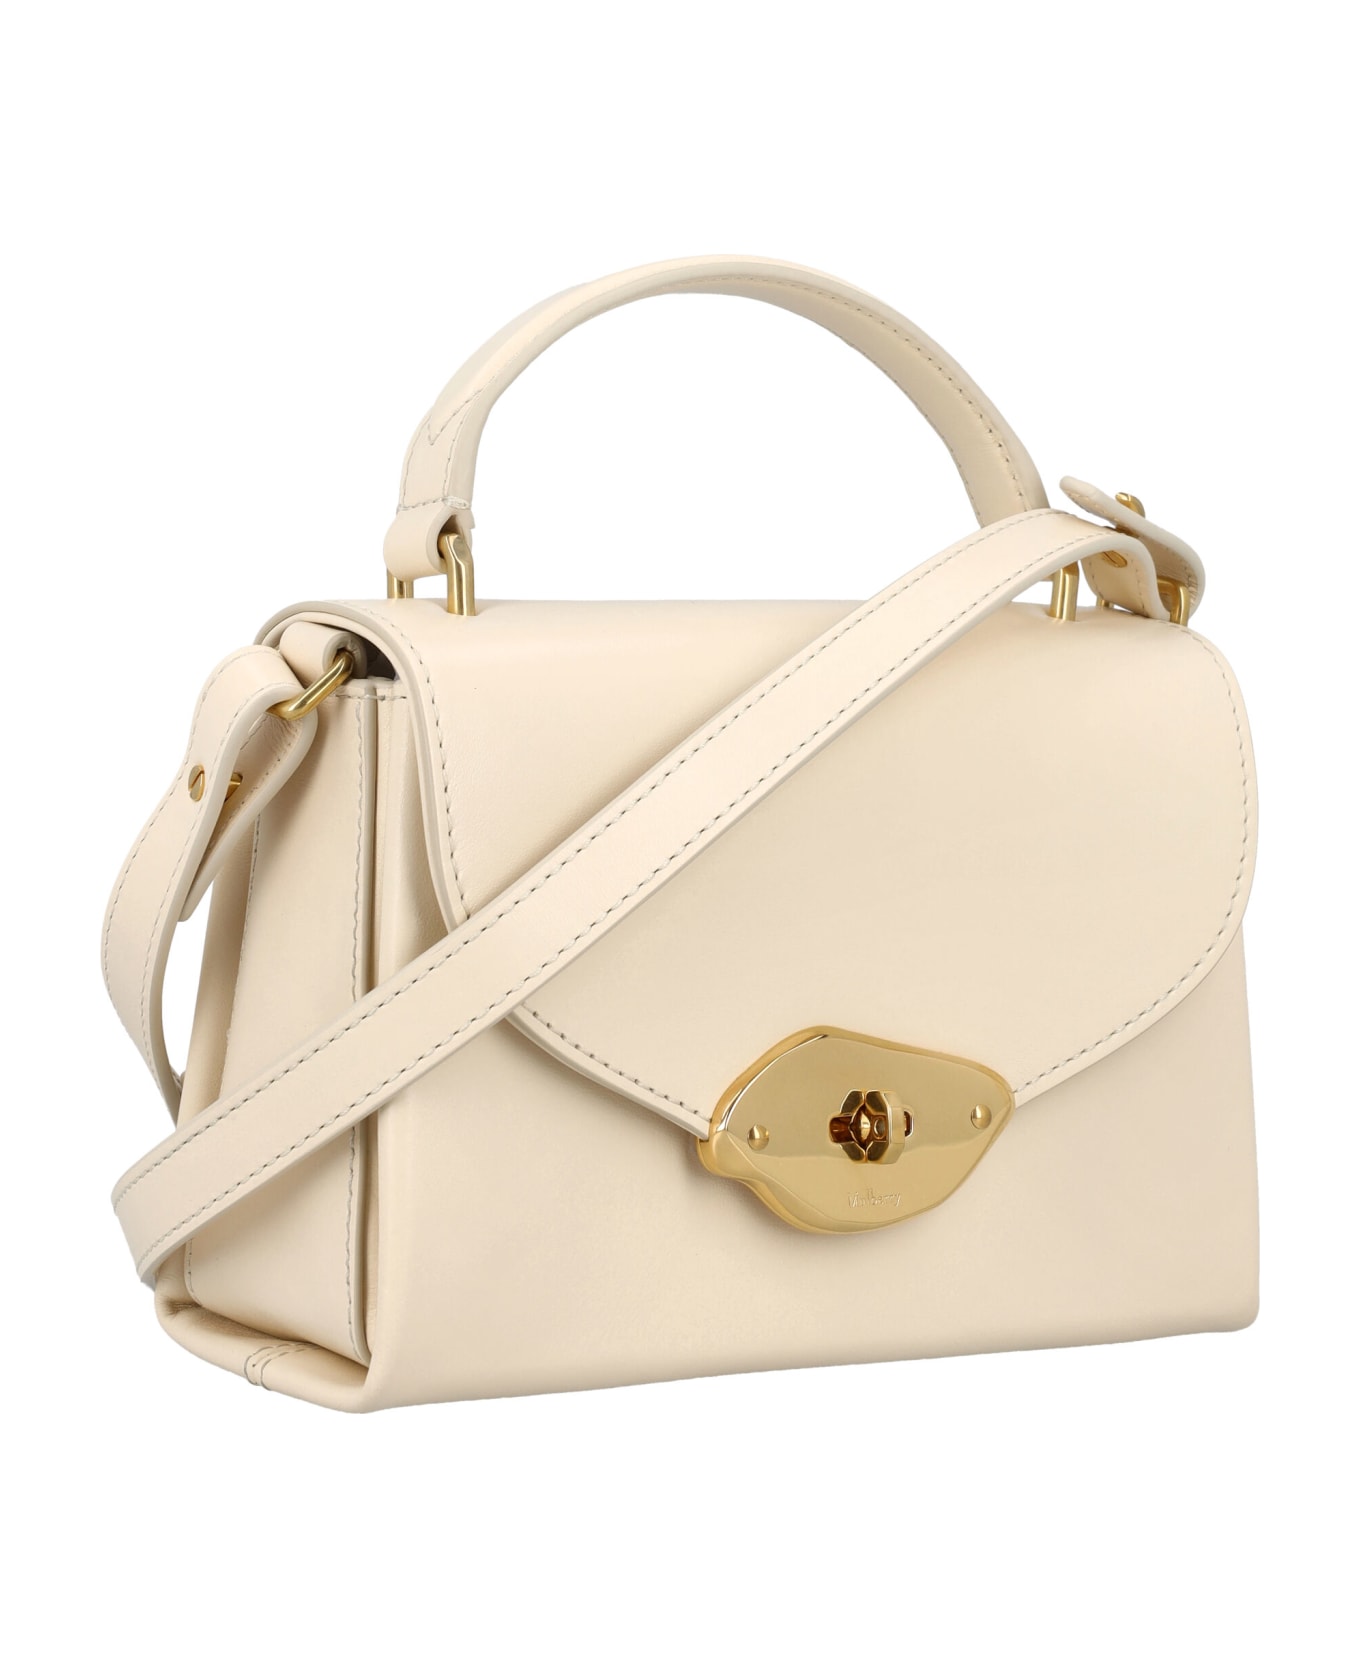 Mulberry Small Lana Top Handle - EGGSHELL